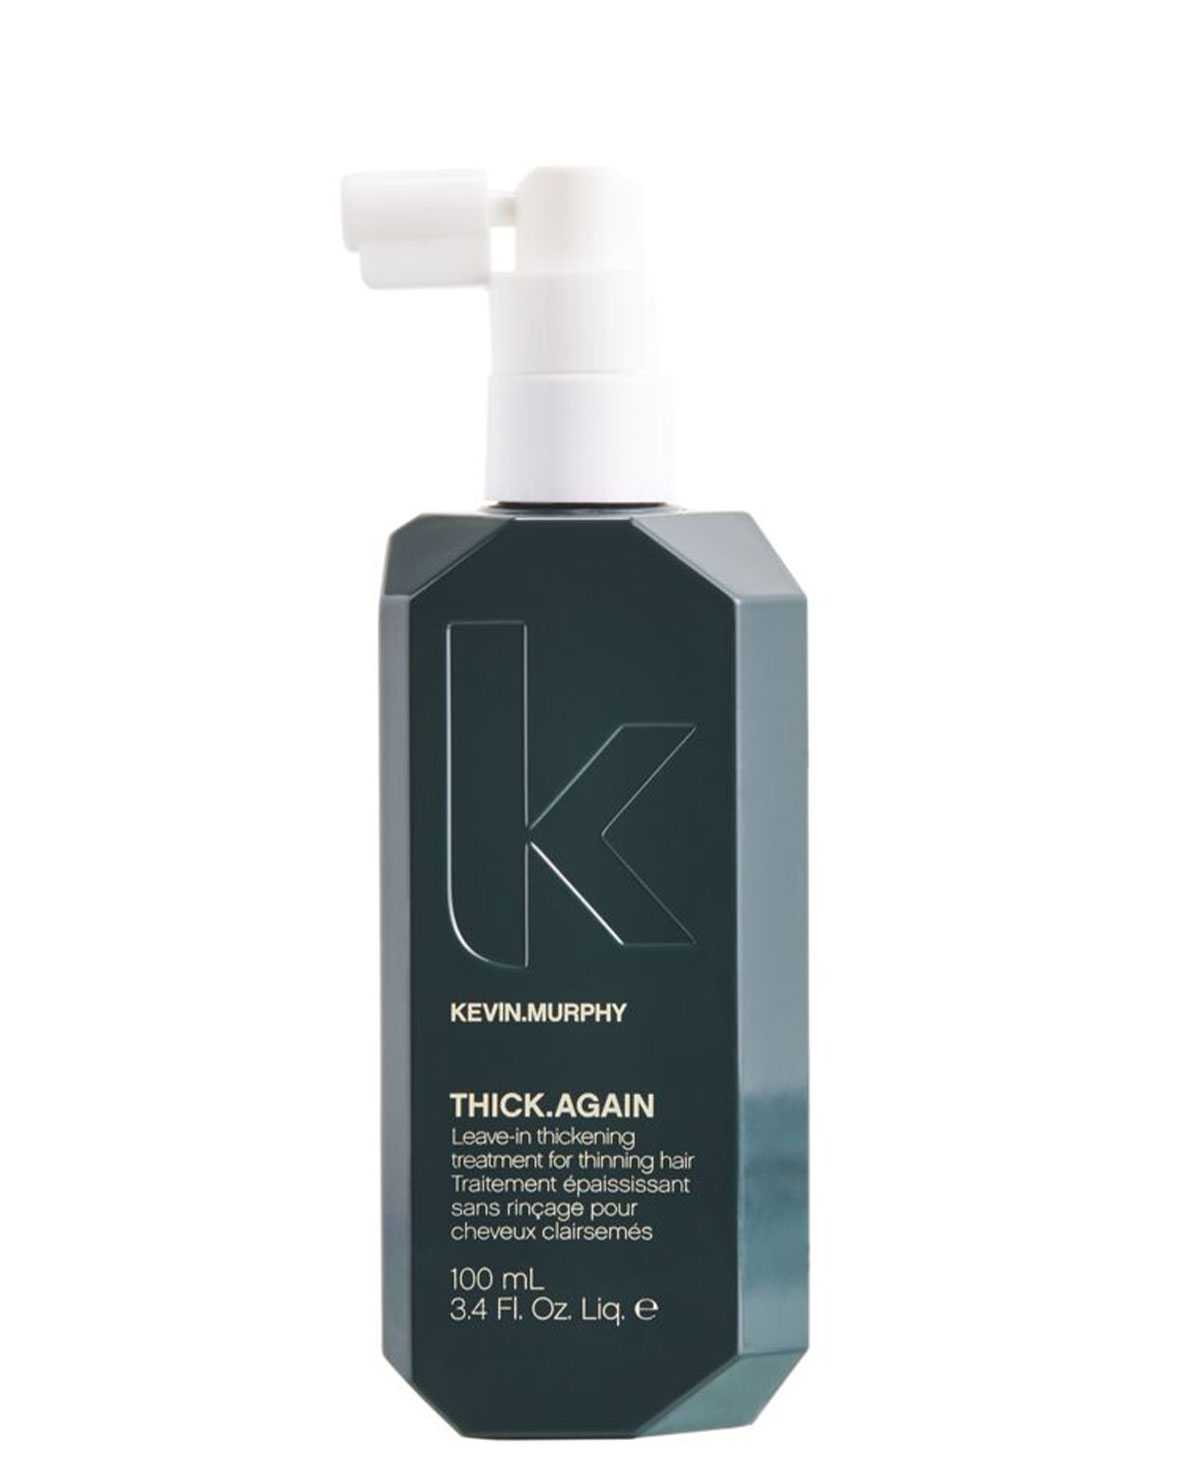 Kevin.Murphy THICK.AGAIN 100ml